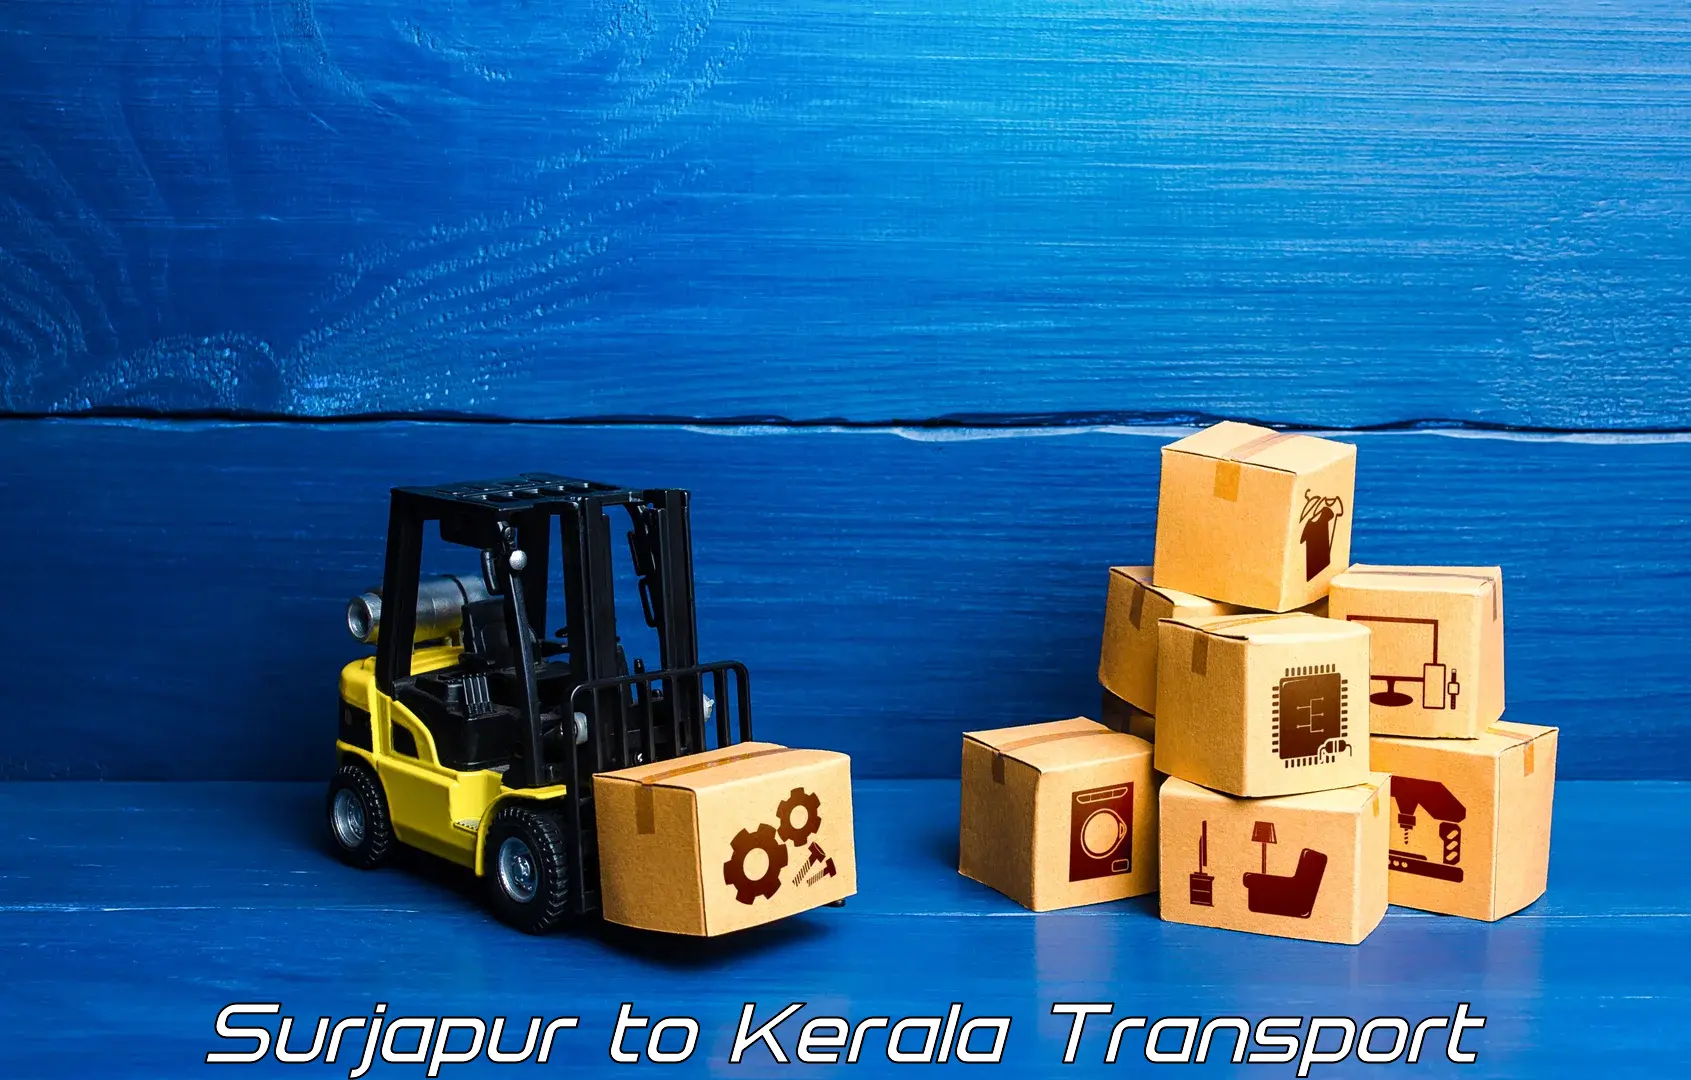 Express transport services in Surjapur to Kerala